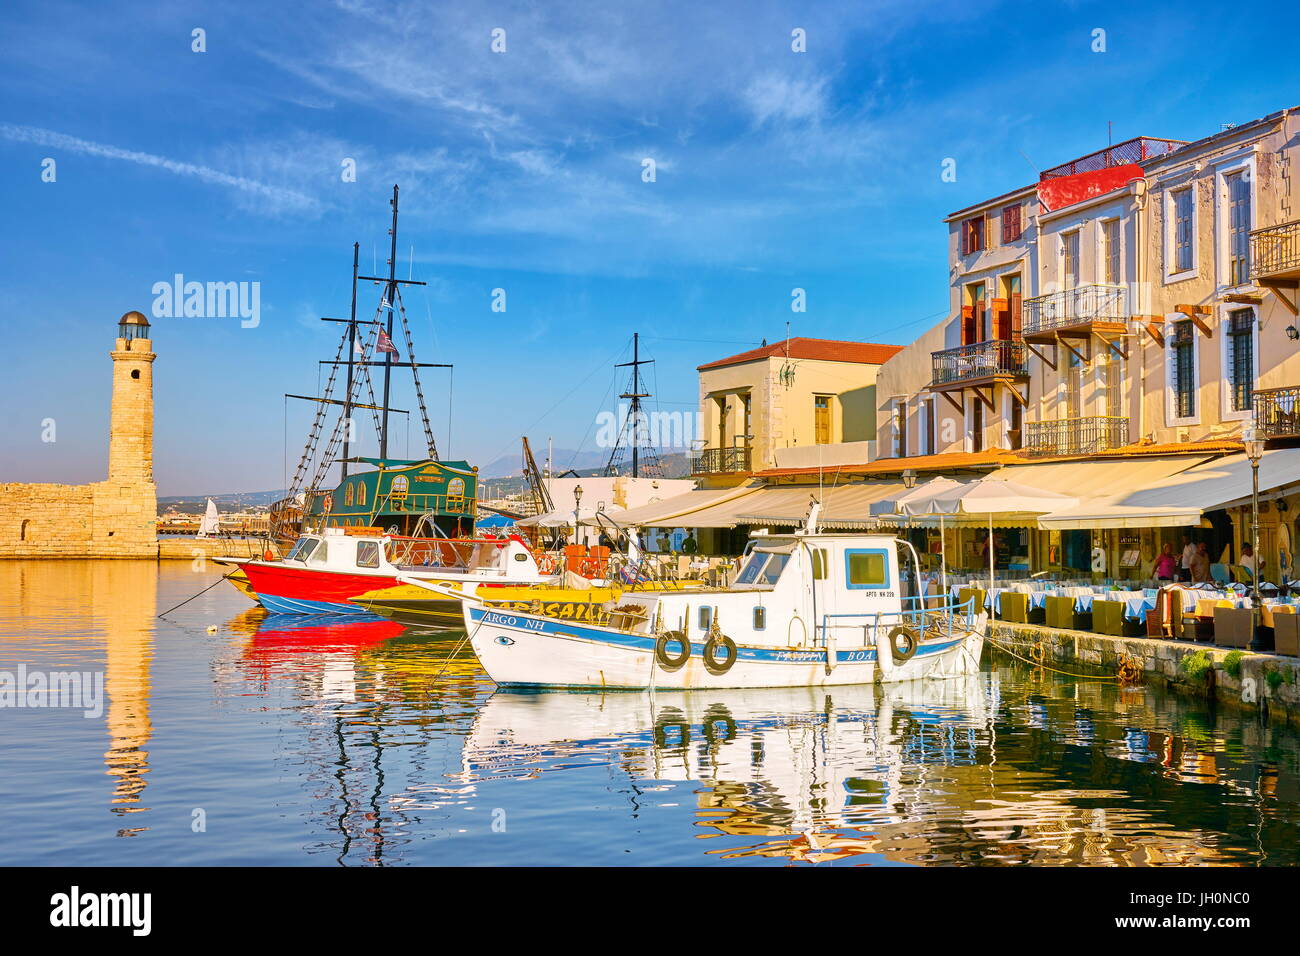 Old Venetian Port, lighthouse in the background, Rethymno, Crete Island, Greece Stock Photo